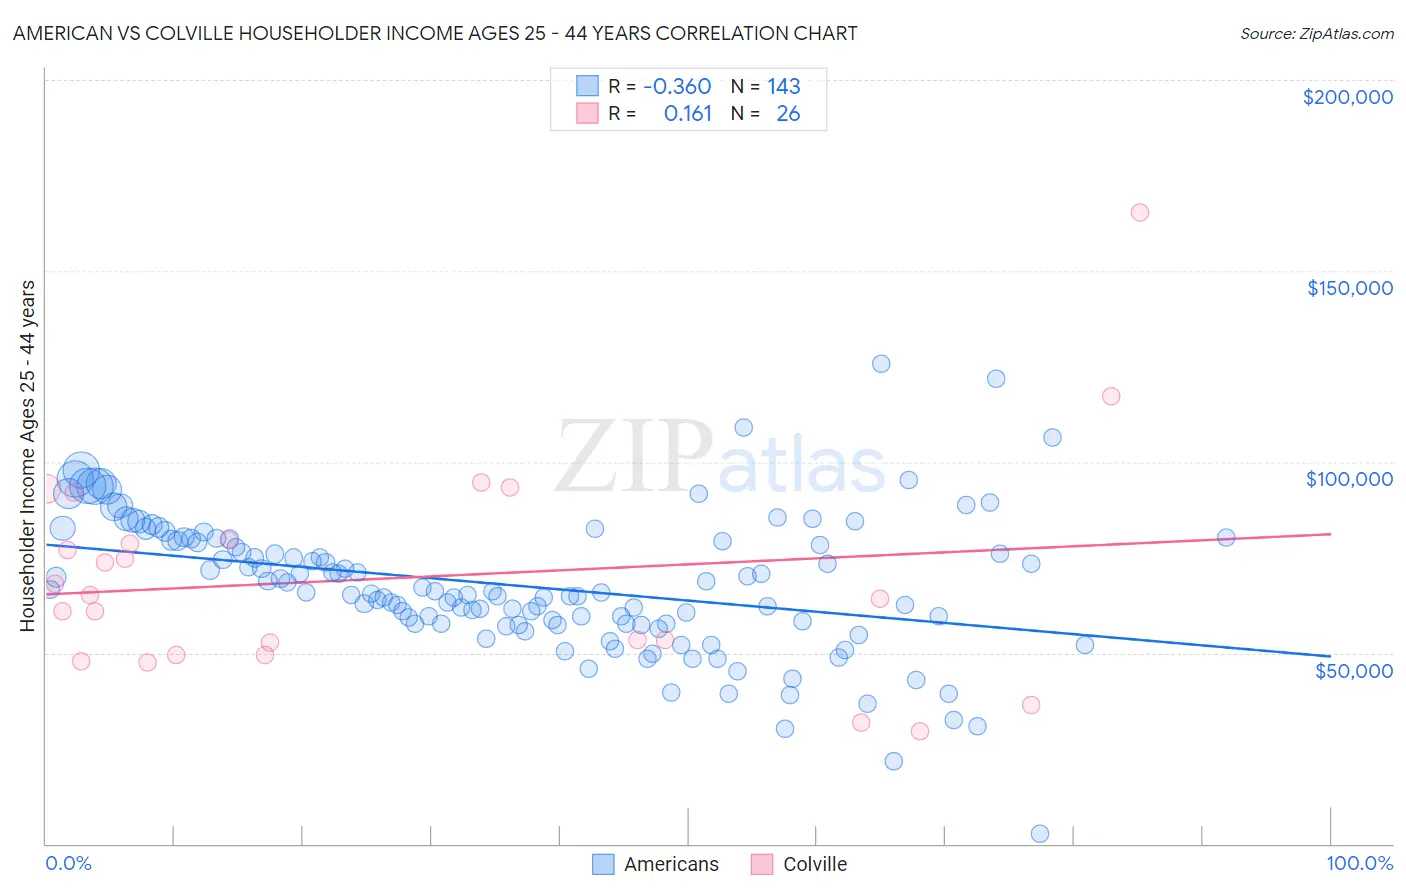 American vs Colville Householder Income Ages 25 - 44 years